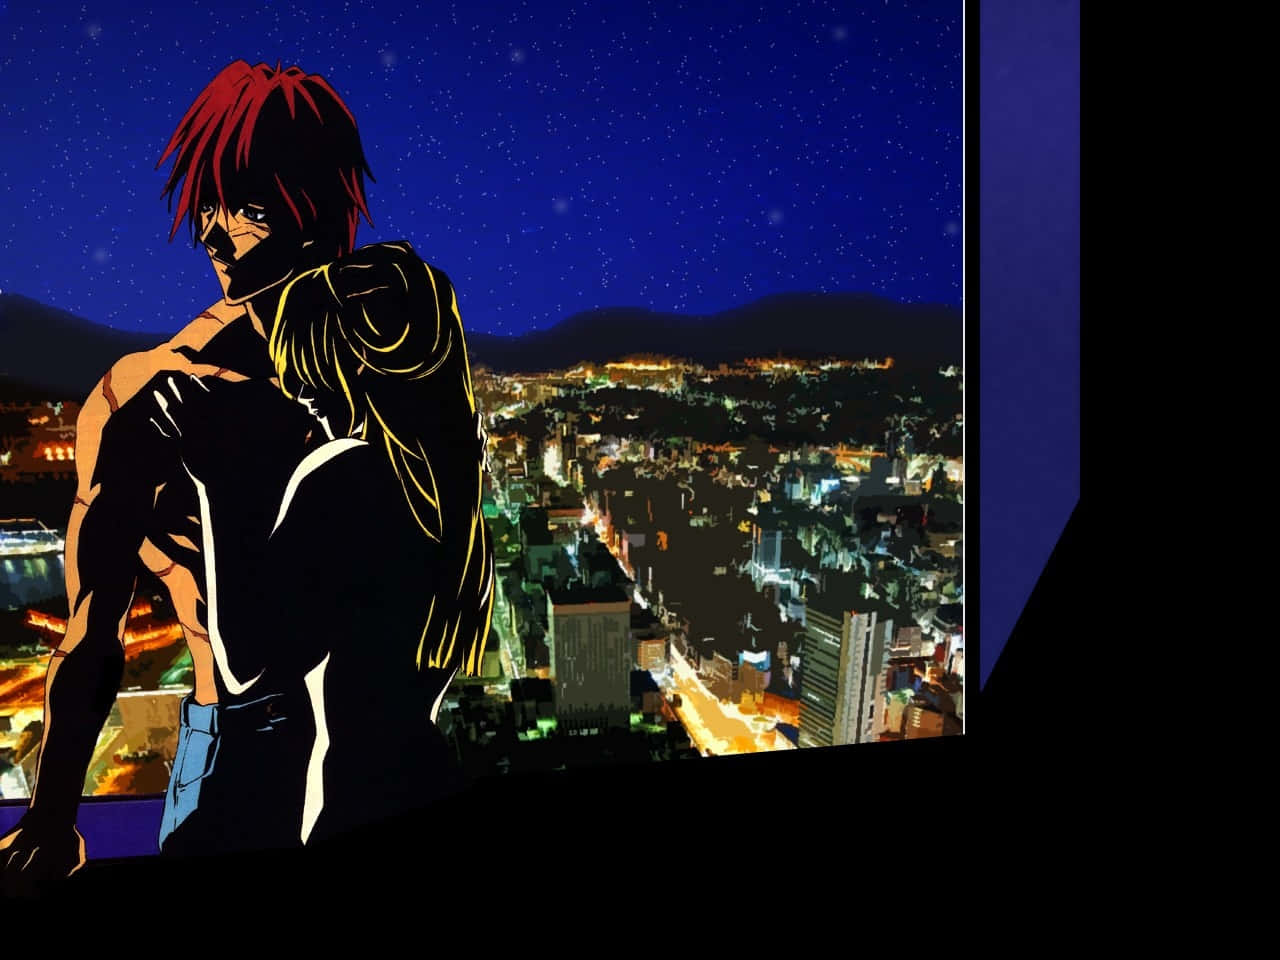 Outlaw Star's Space Adventure Unfolds Wallpaper